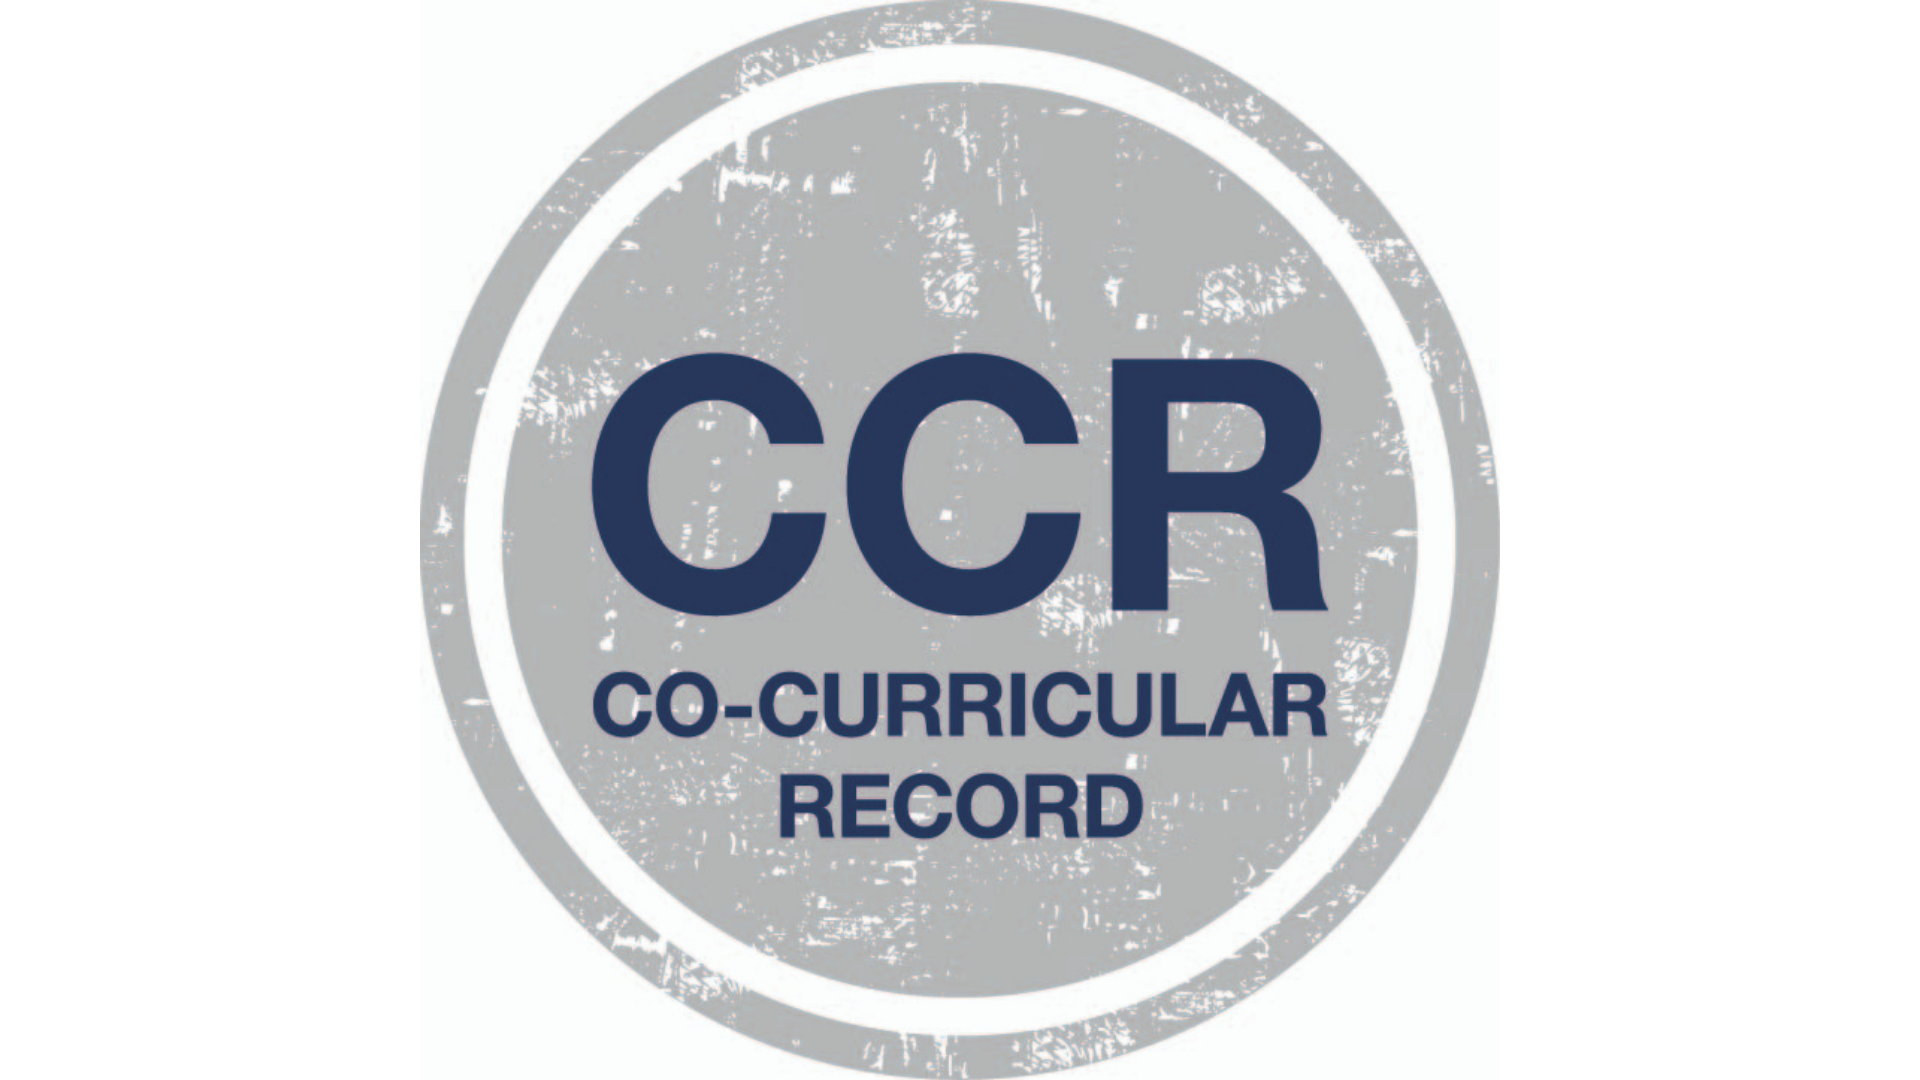 Showcase Image for Co-Curricular Record